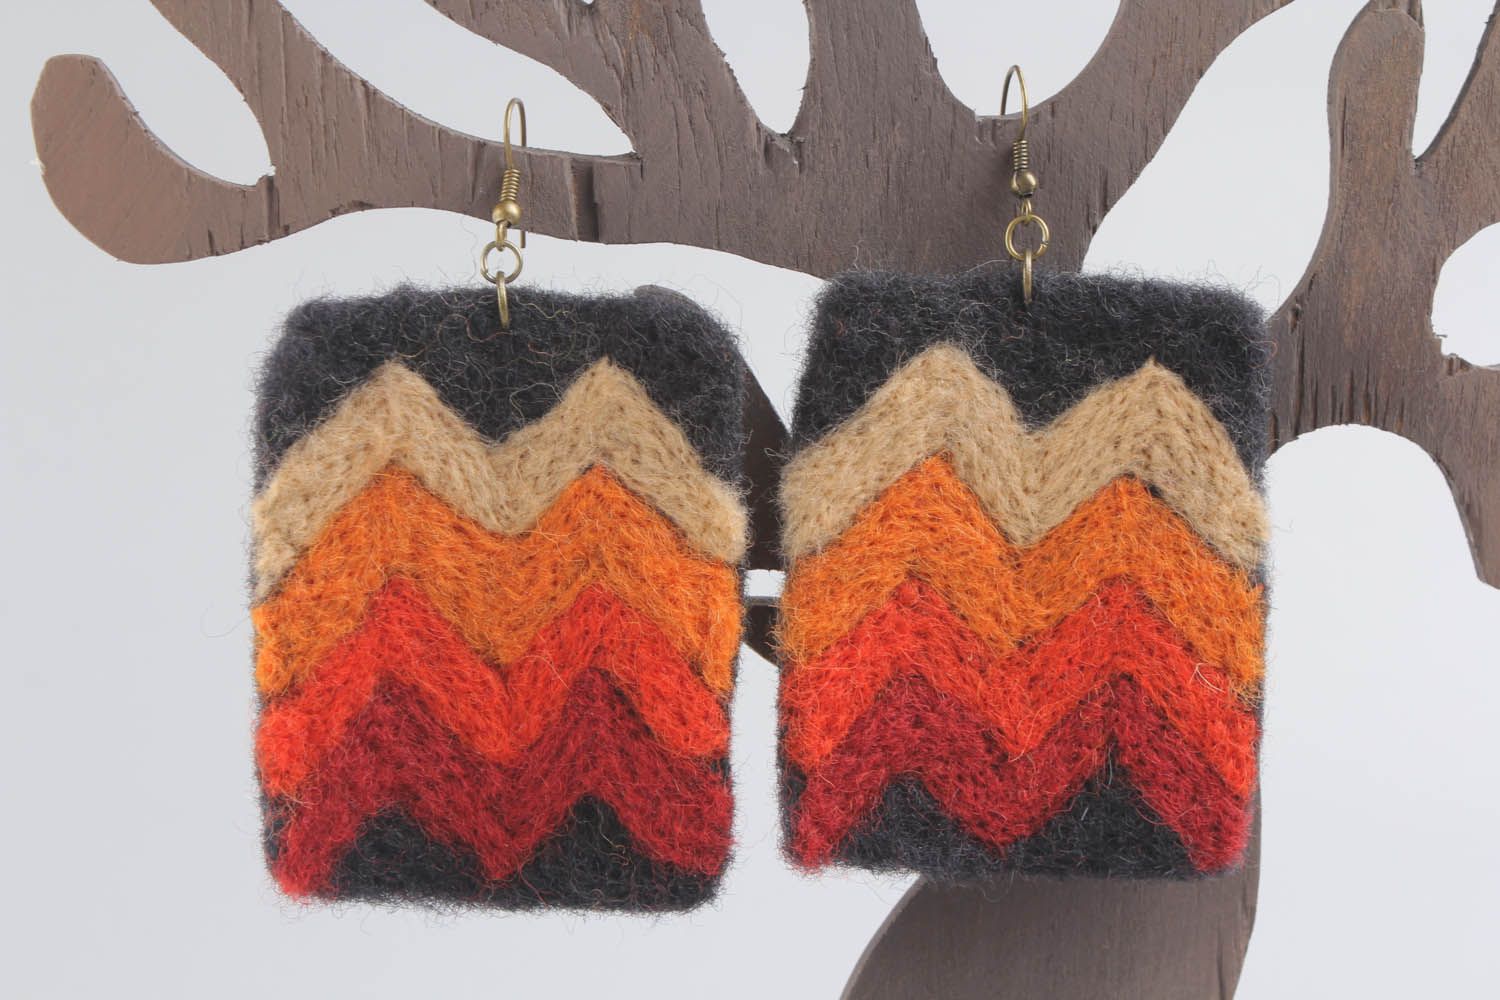 Woolen earrings made using the technique of needle felting photo 1